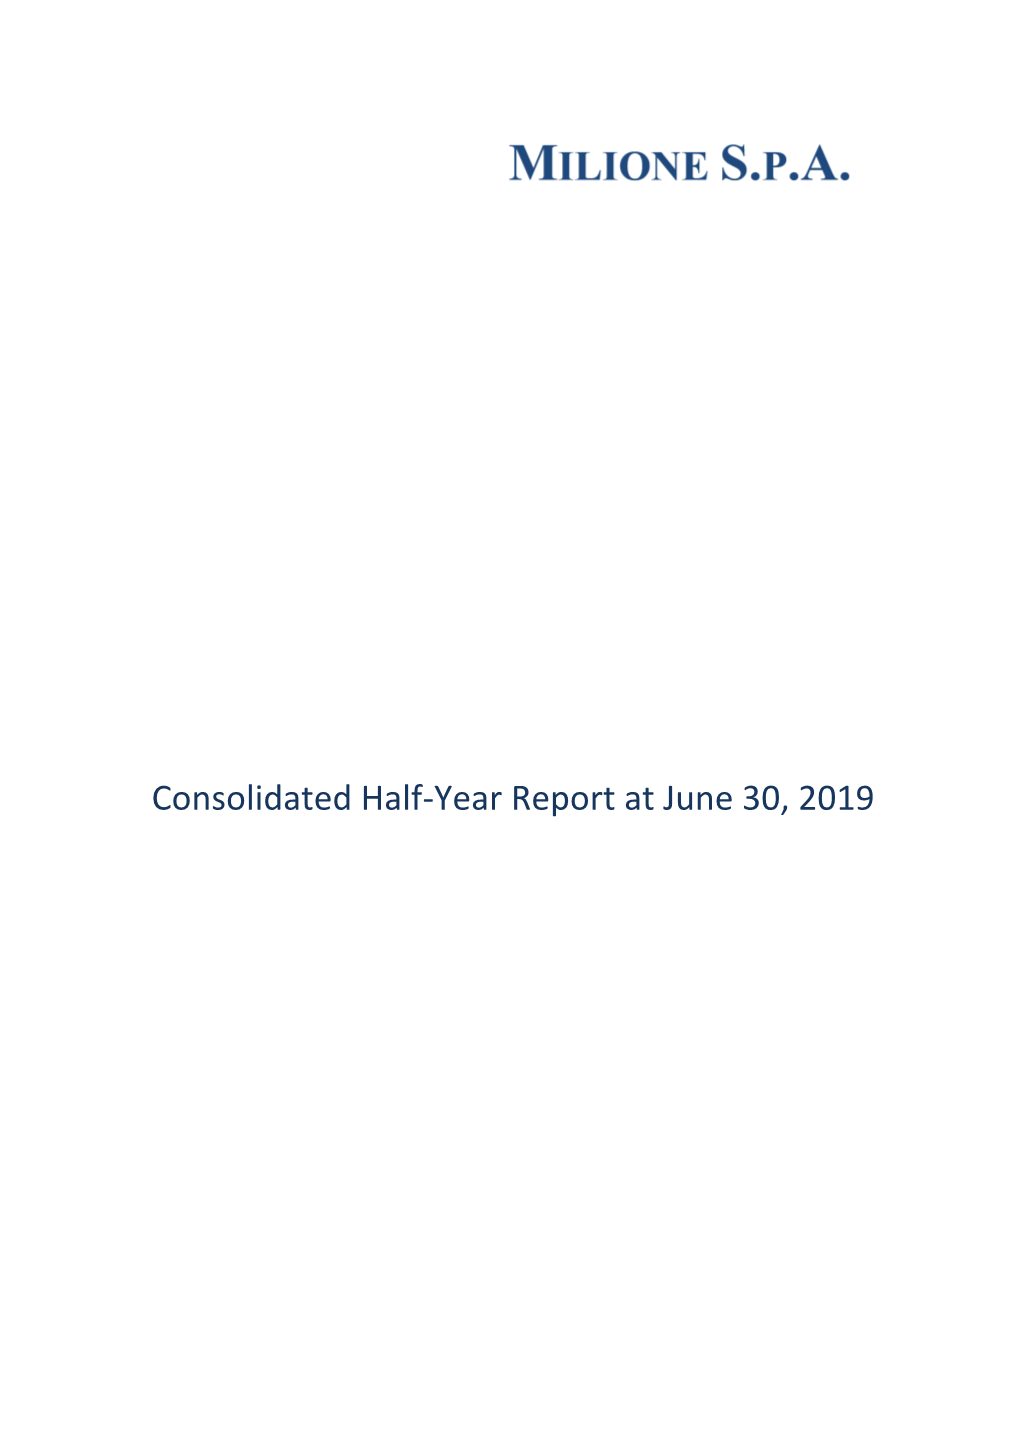 Consolidated Half-Year Report at June 30, 2019